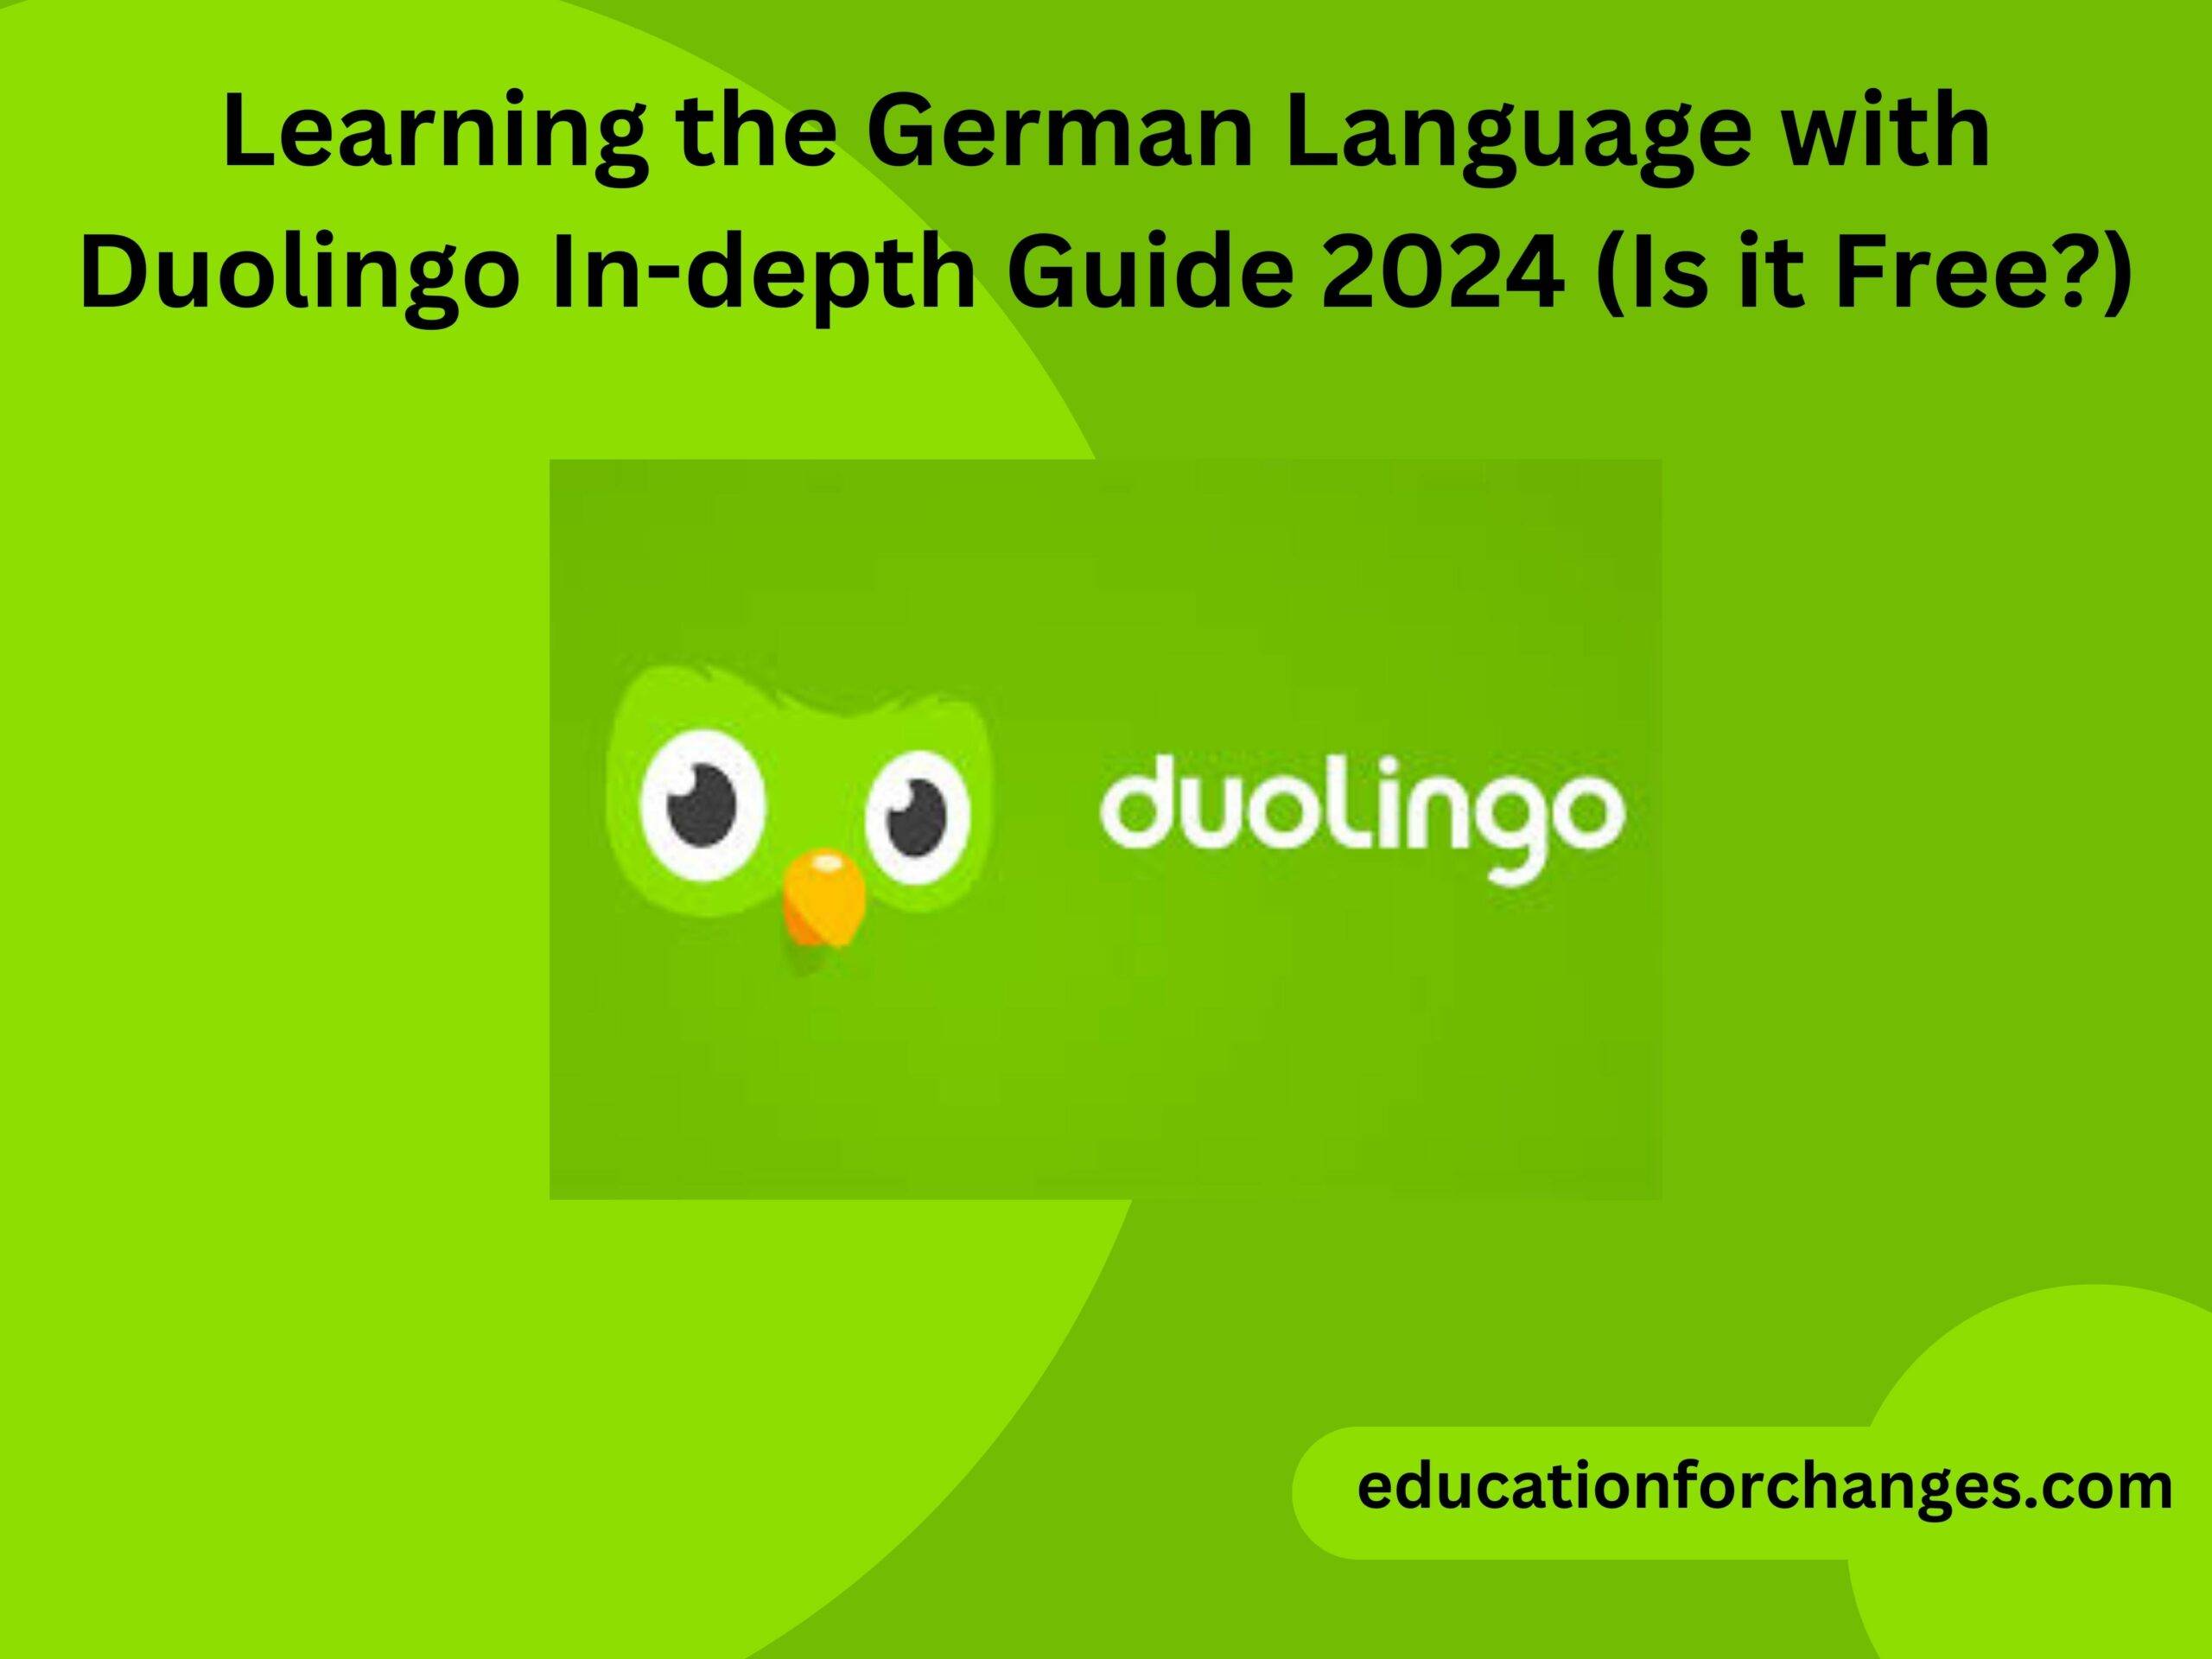 Learning the German Language with Duolingo In-depth Guide 2024 (Is it Free)